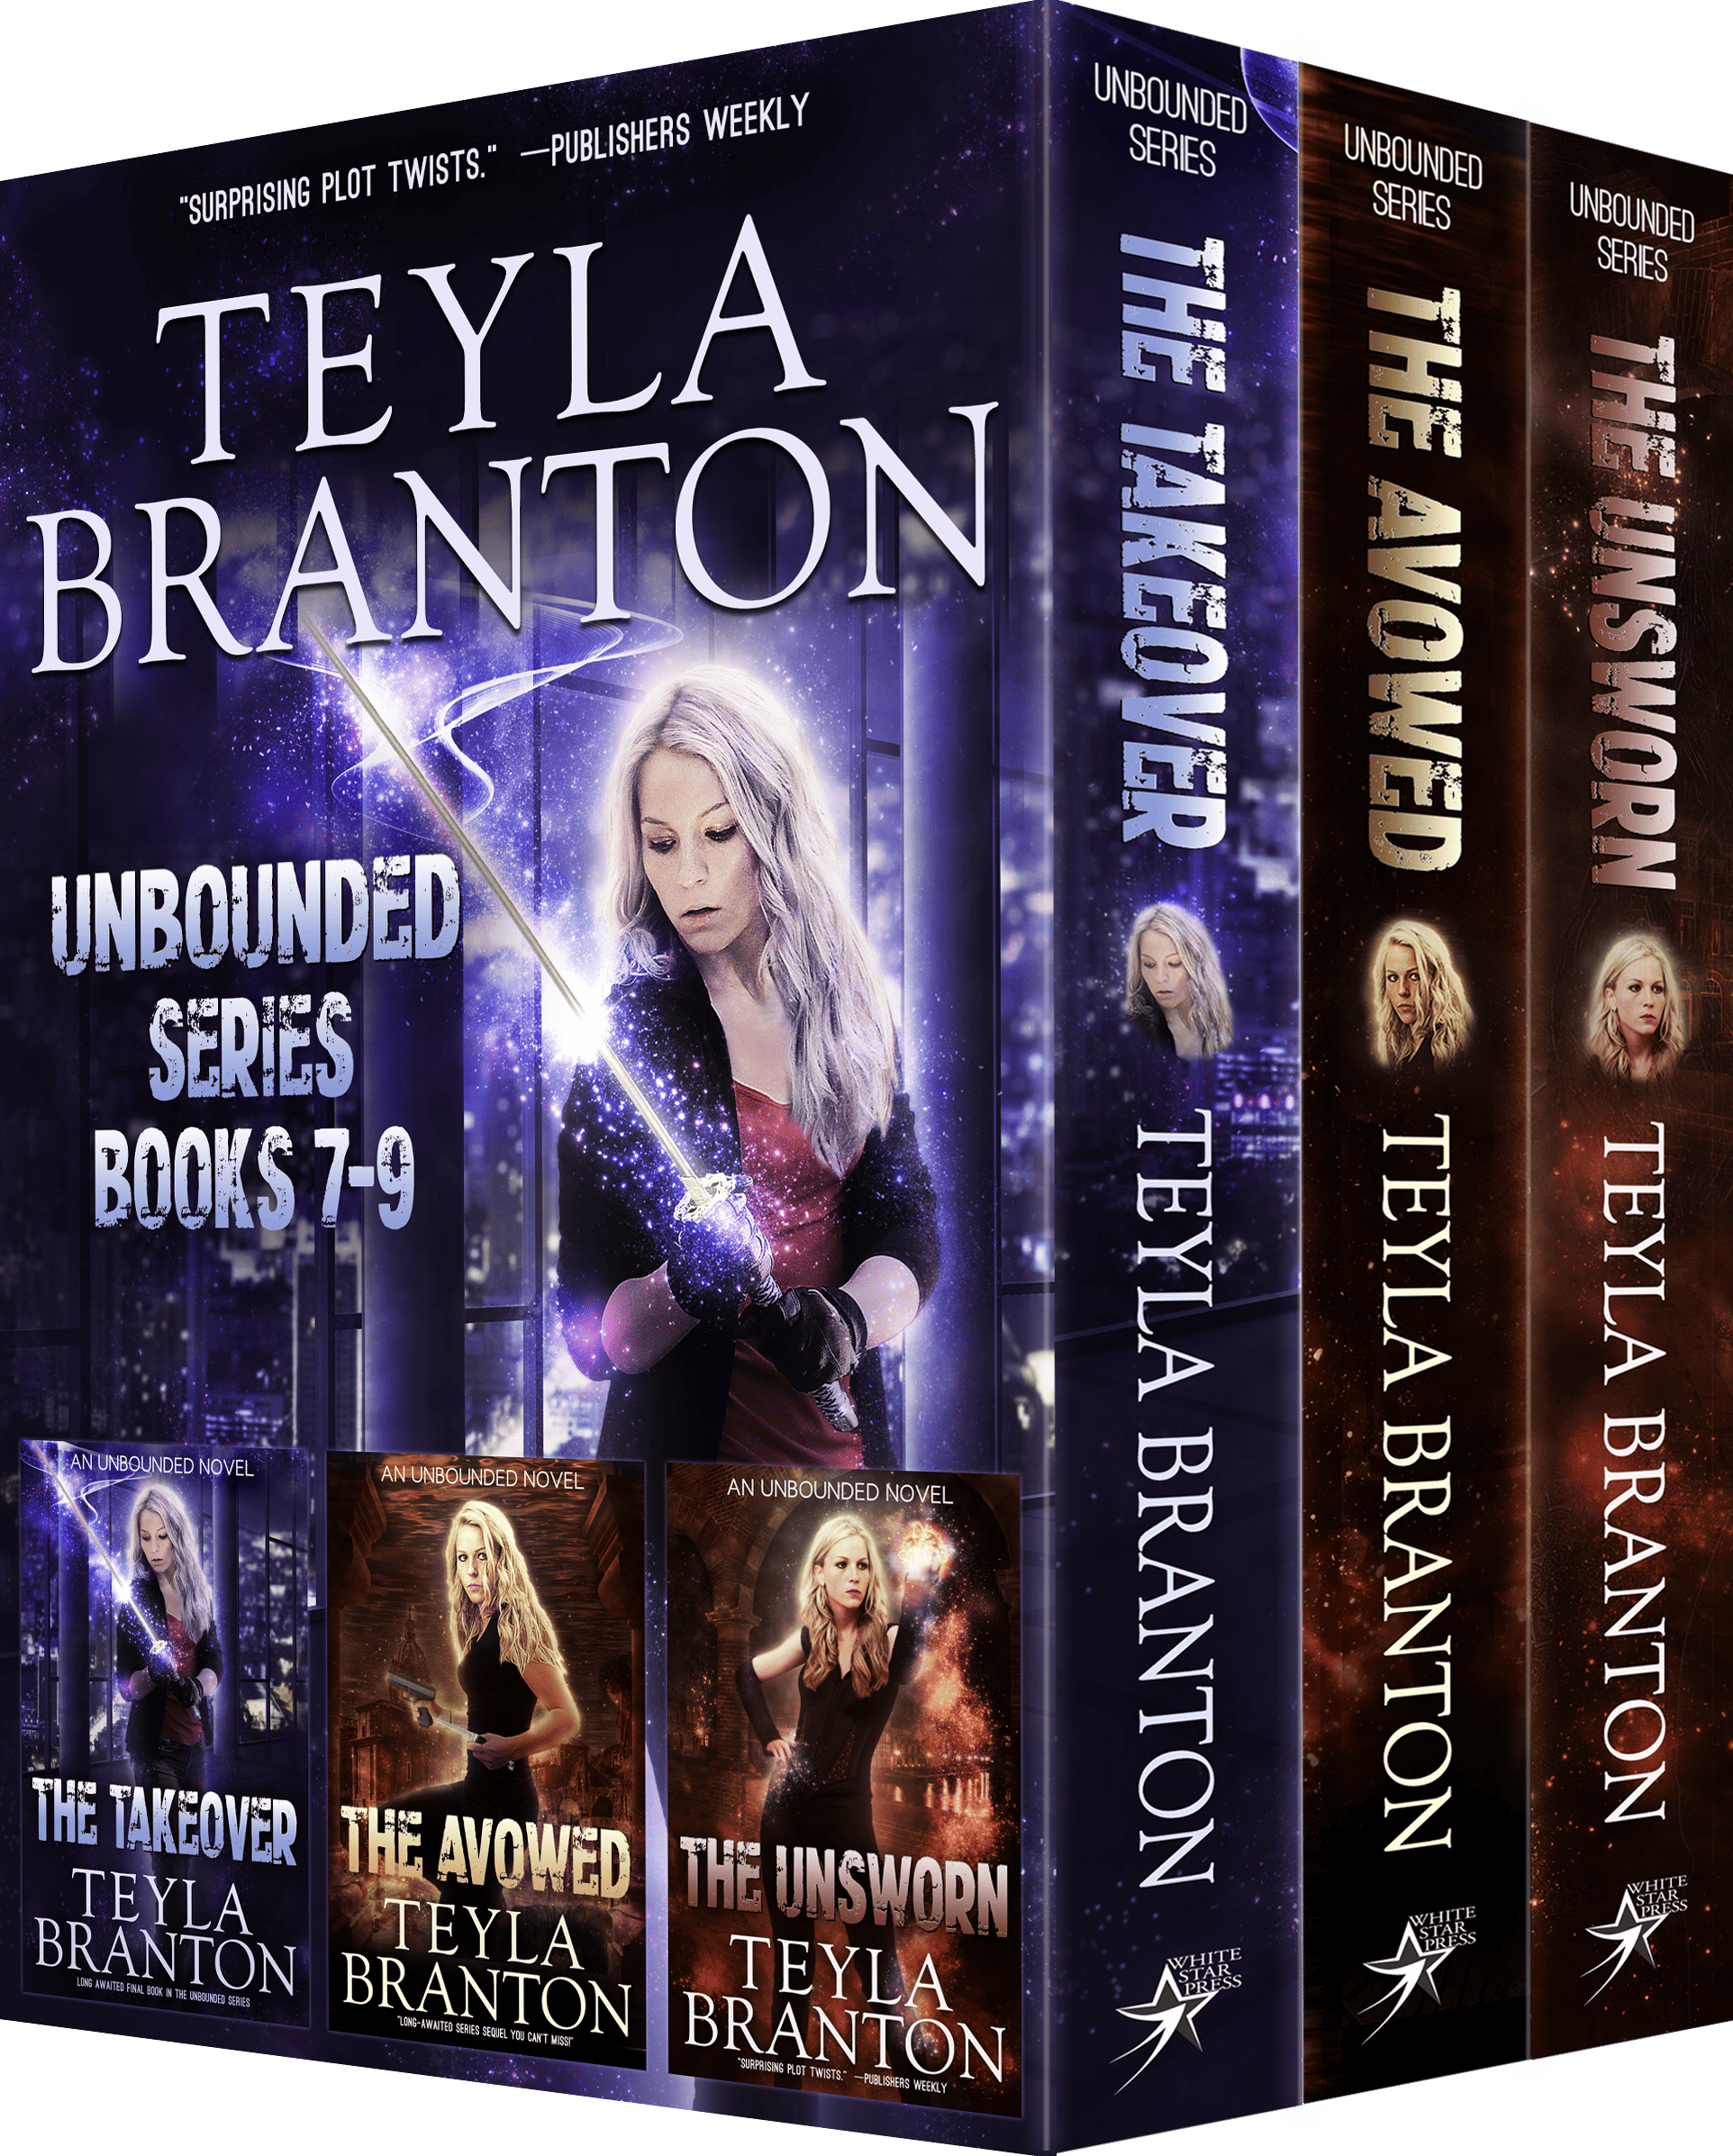 Unbounded Series Books 7-9 by Teyla Branton